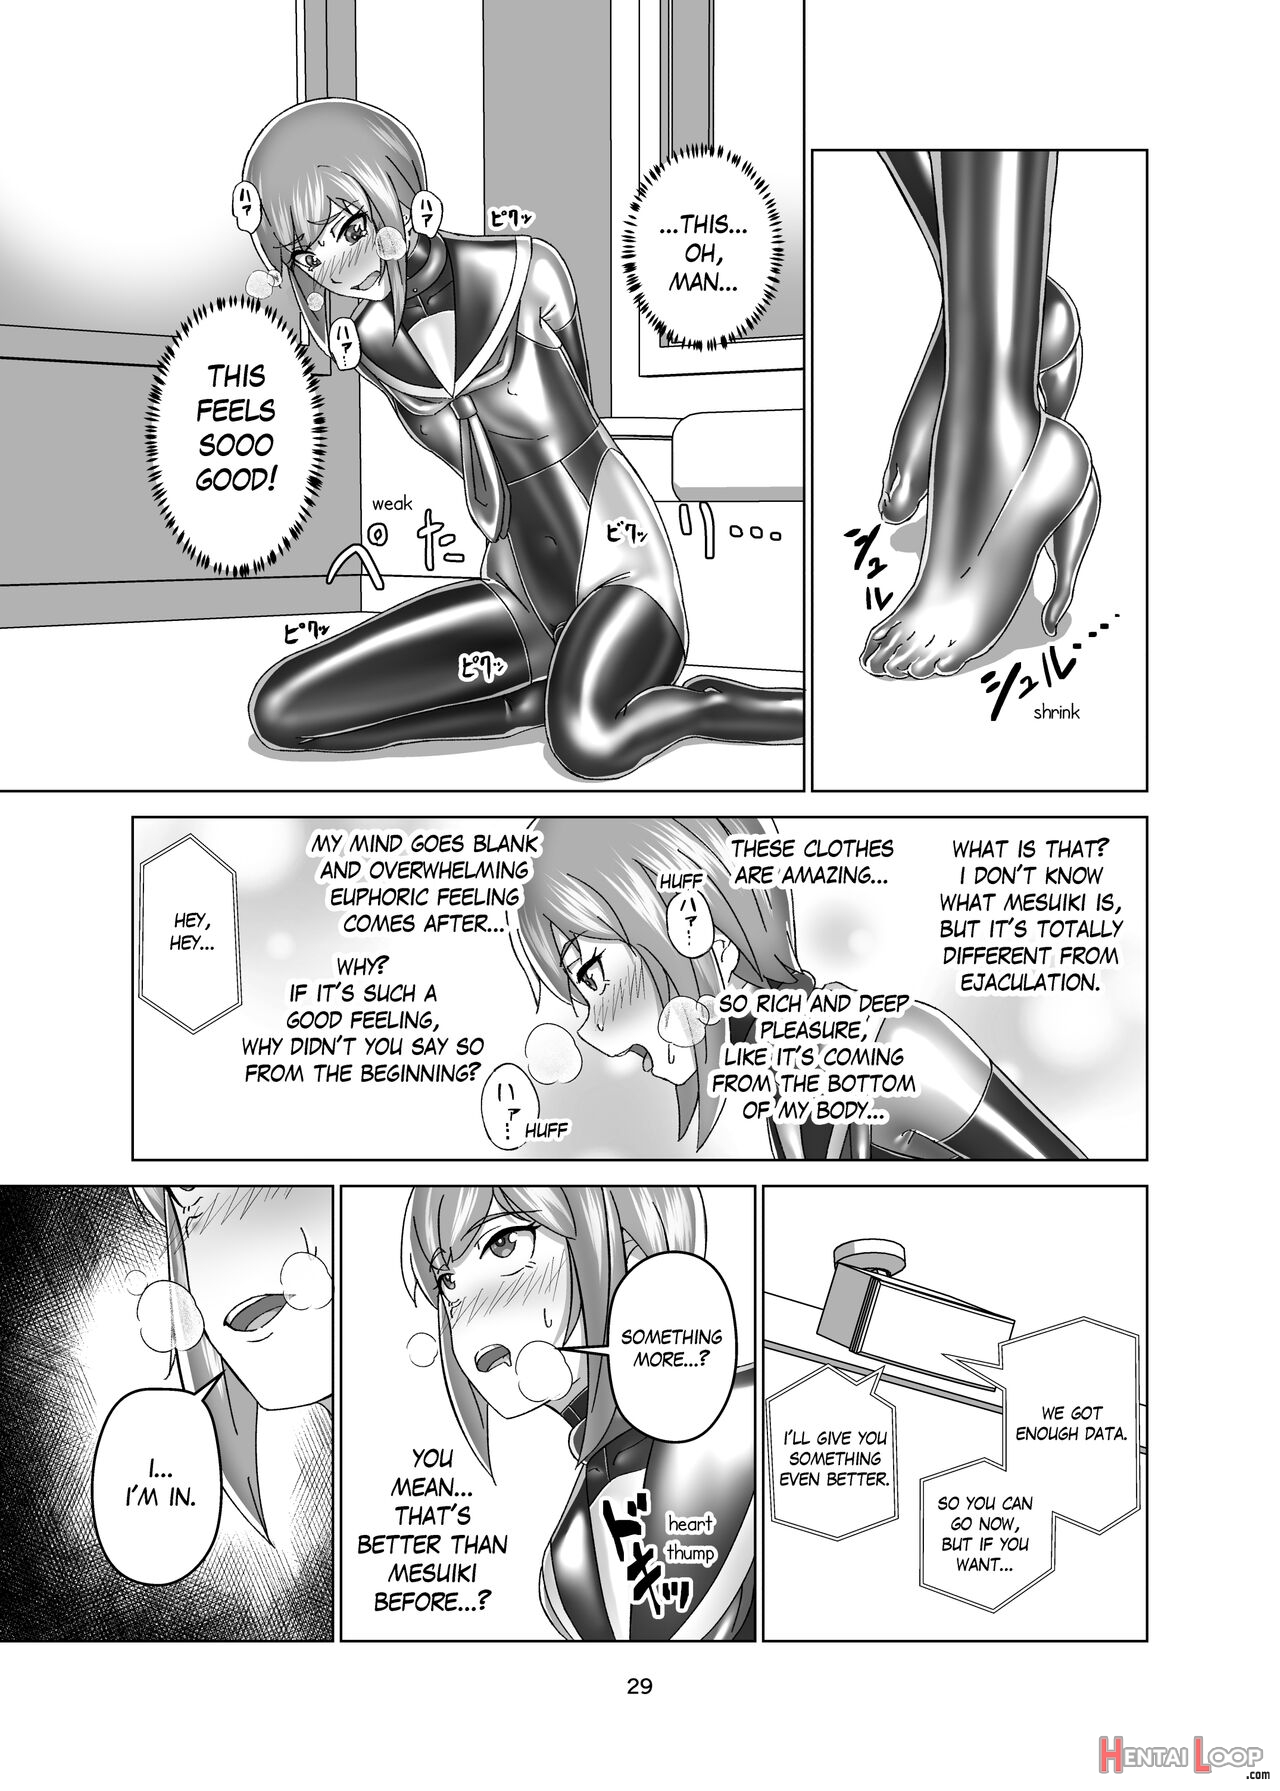 Extreme Bondage And Mesuiki Costume Test With You page 29